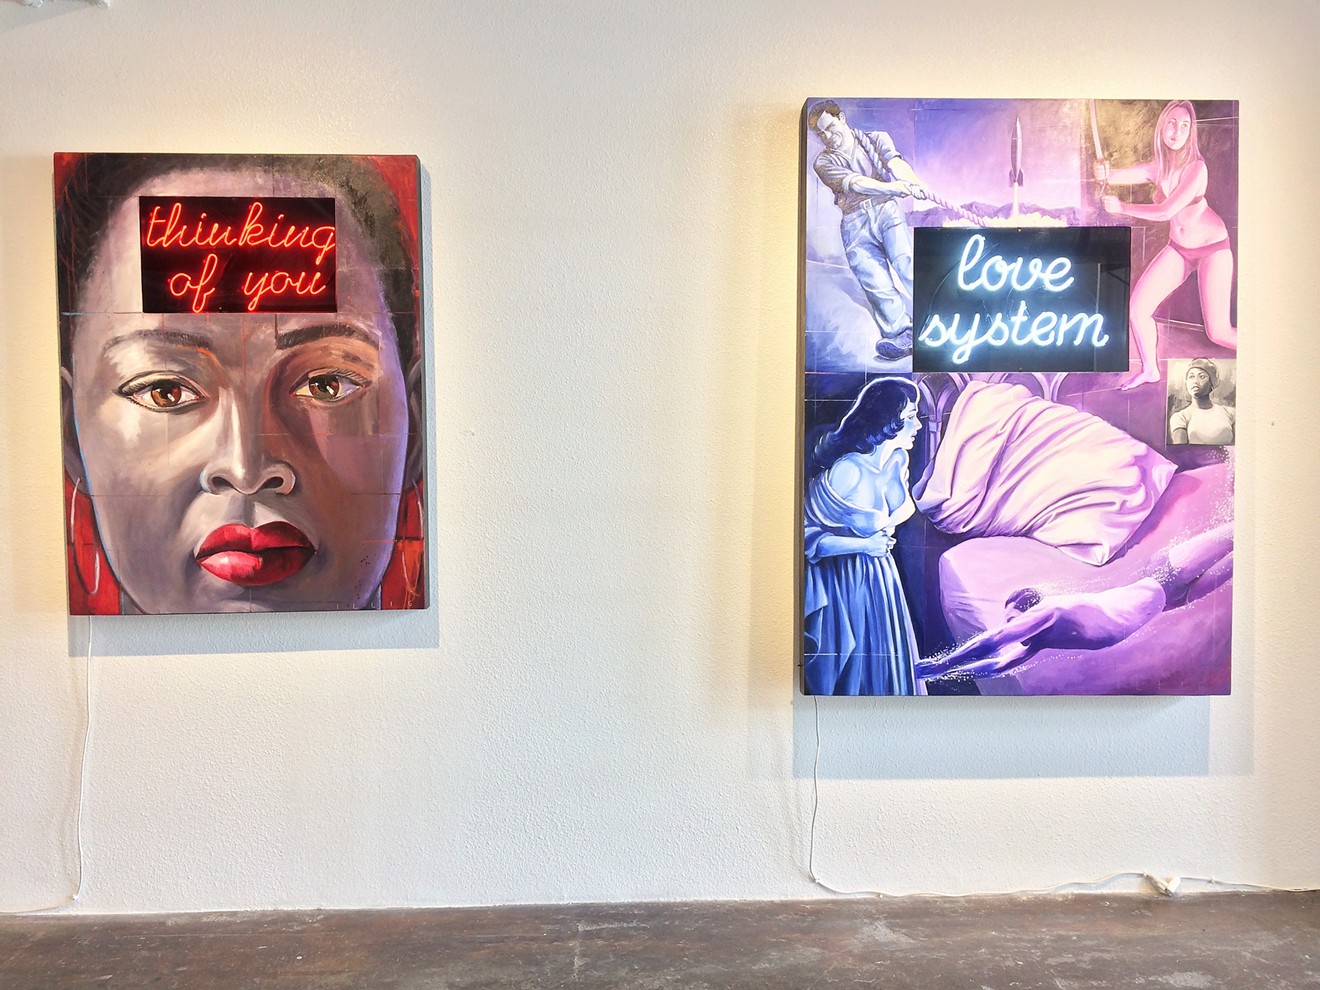 Peter Illig,“thinking of you” and “love system," oil on panel with neon.